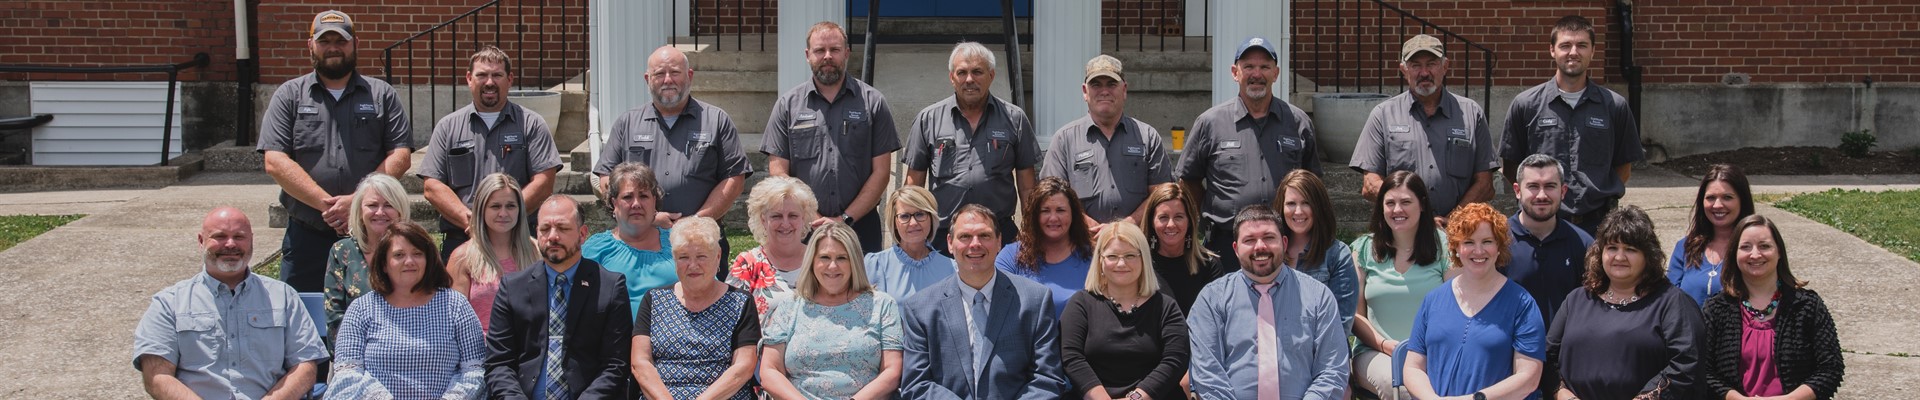 Group photo Estill County Central Office Staff